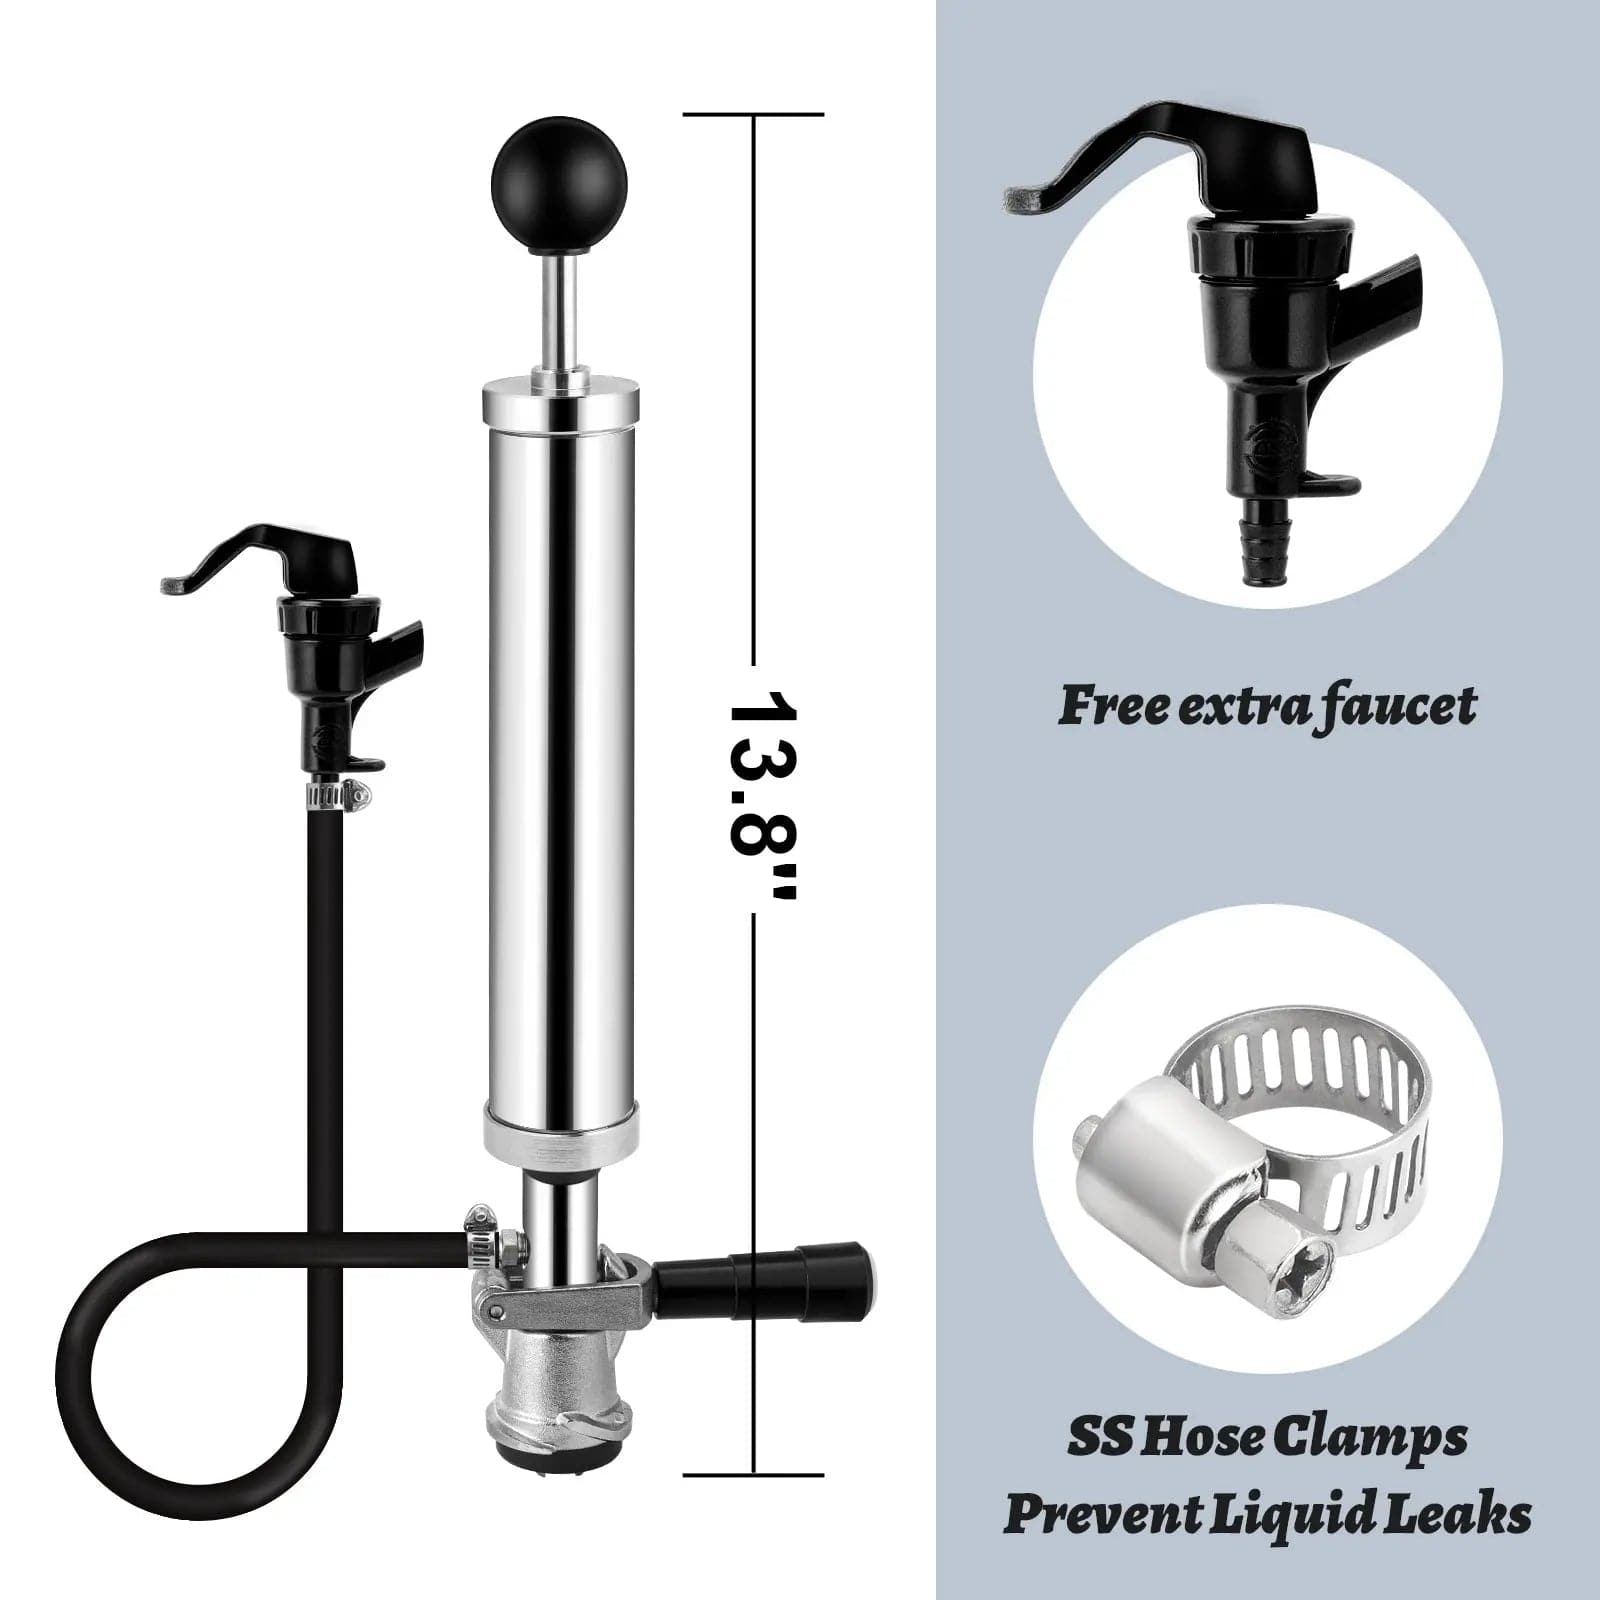 tmcraft 8 inch beer keg party pump products details